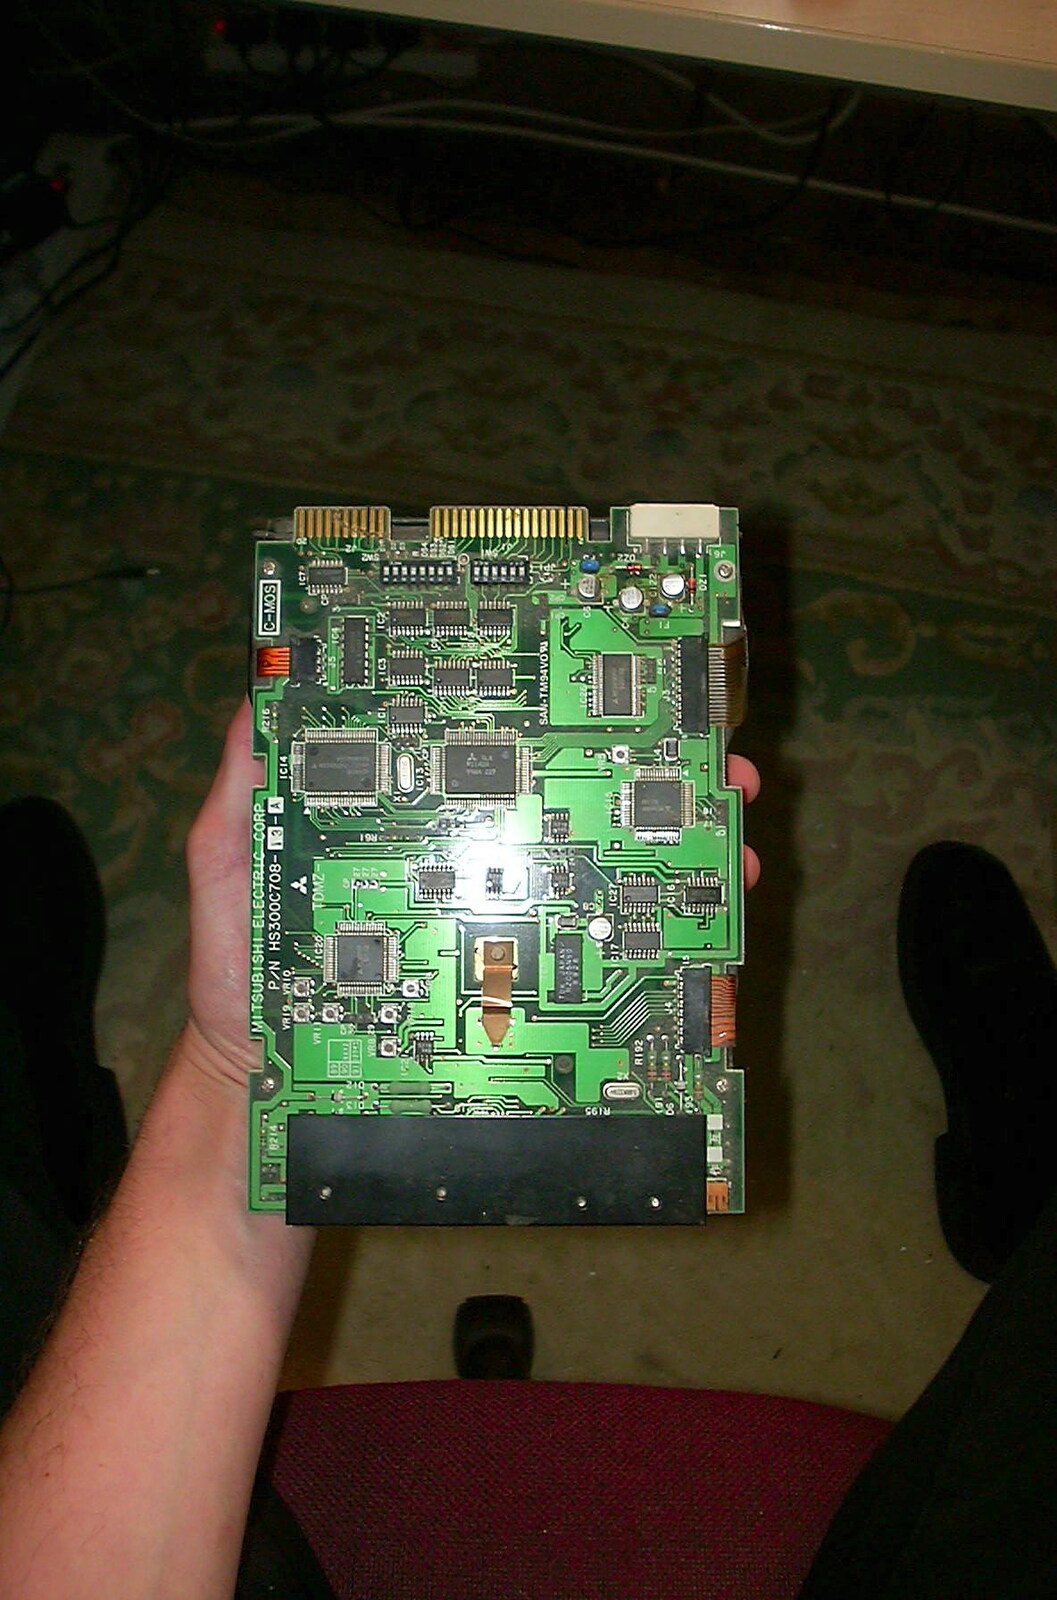 The bottom of the old hard drive from A Hard-Drive Clock and Other Projects, Brome, Suffolk - 28th June 2002